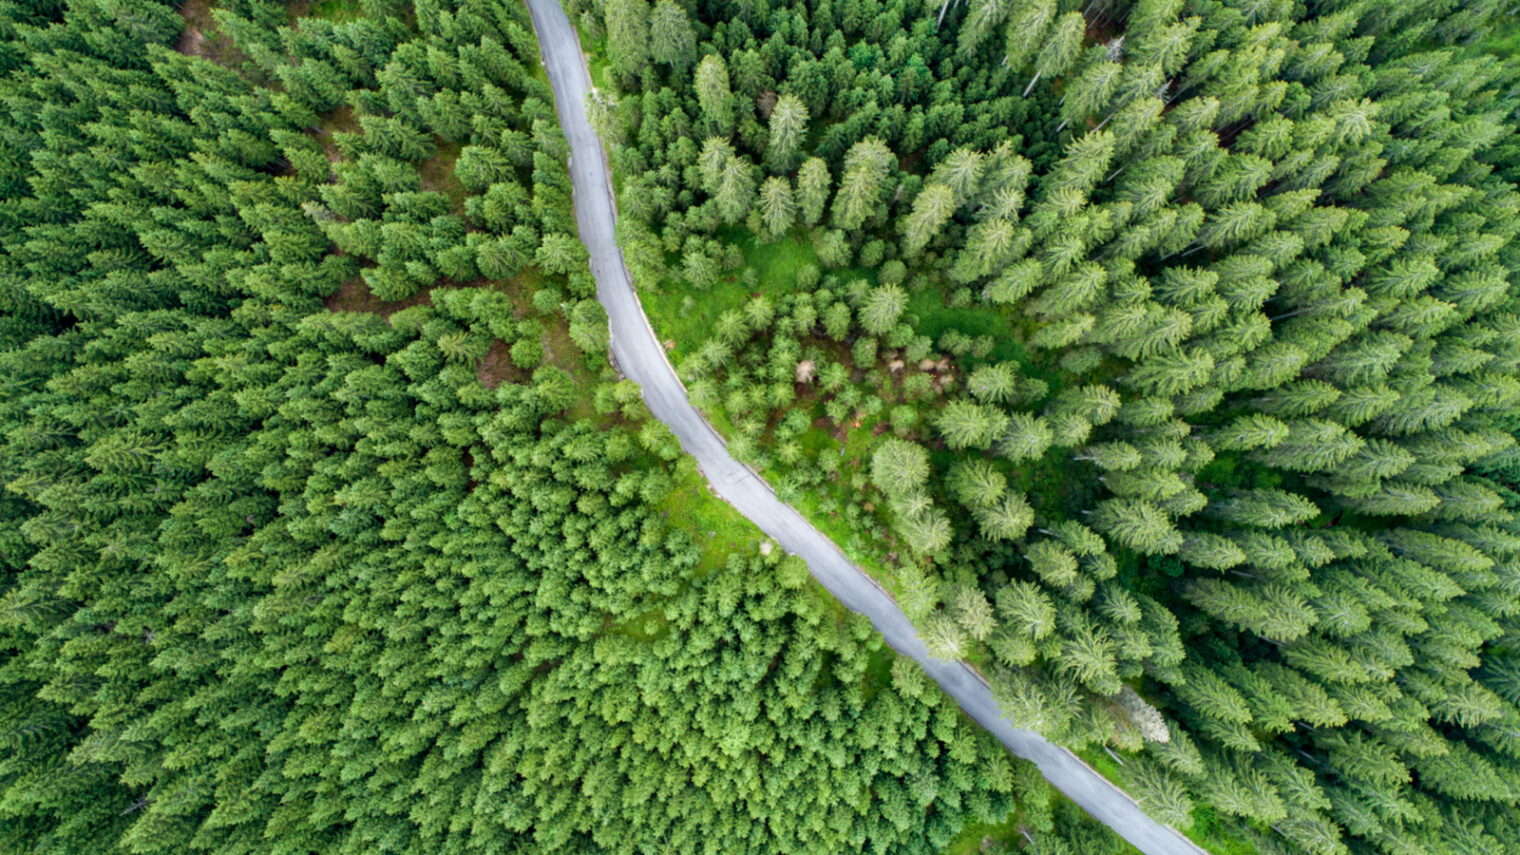 An aerial view of a forest in Slovenia. Photo by Stepo Dinaricus, via Shutterstock.